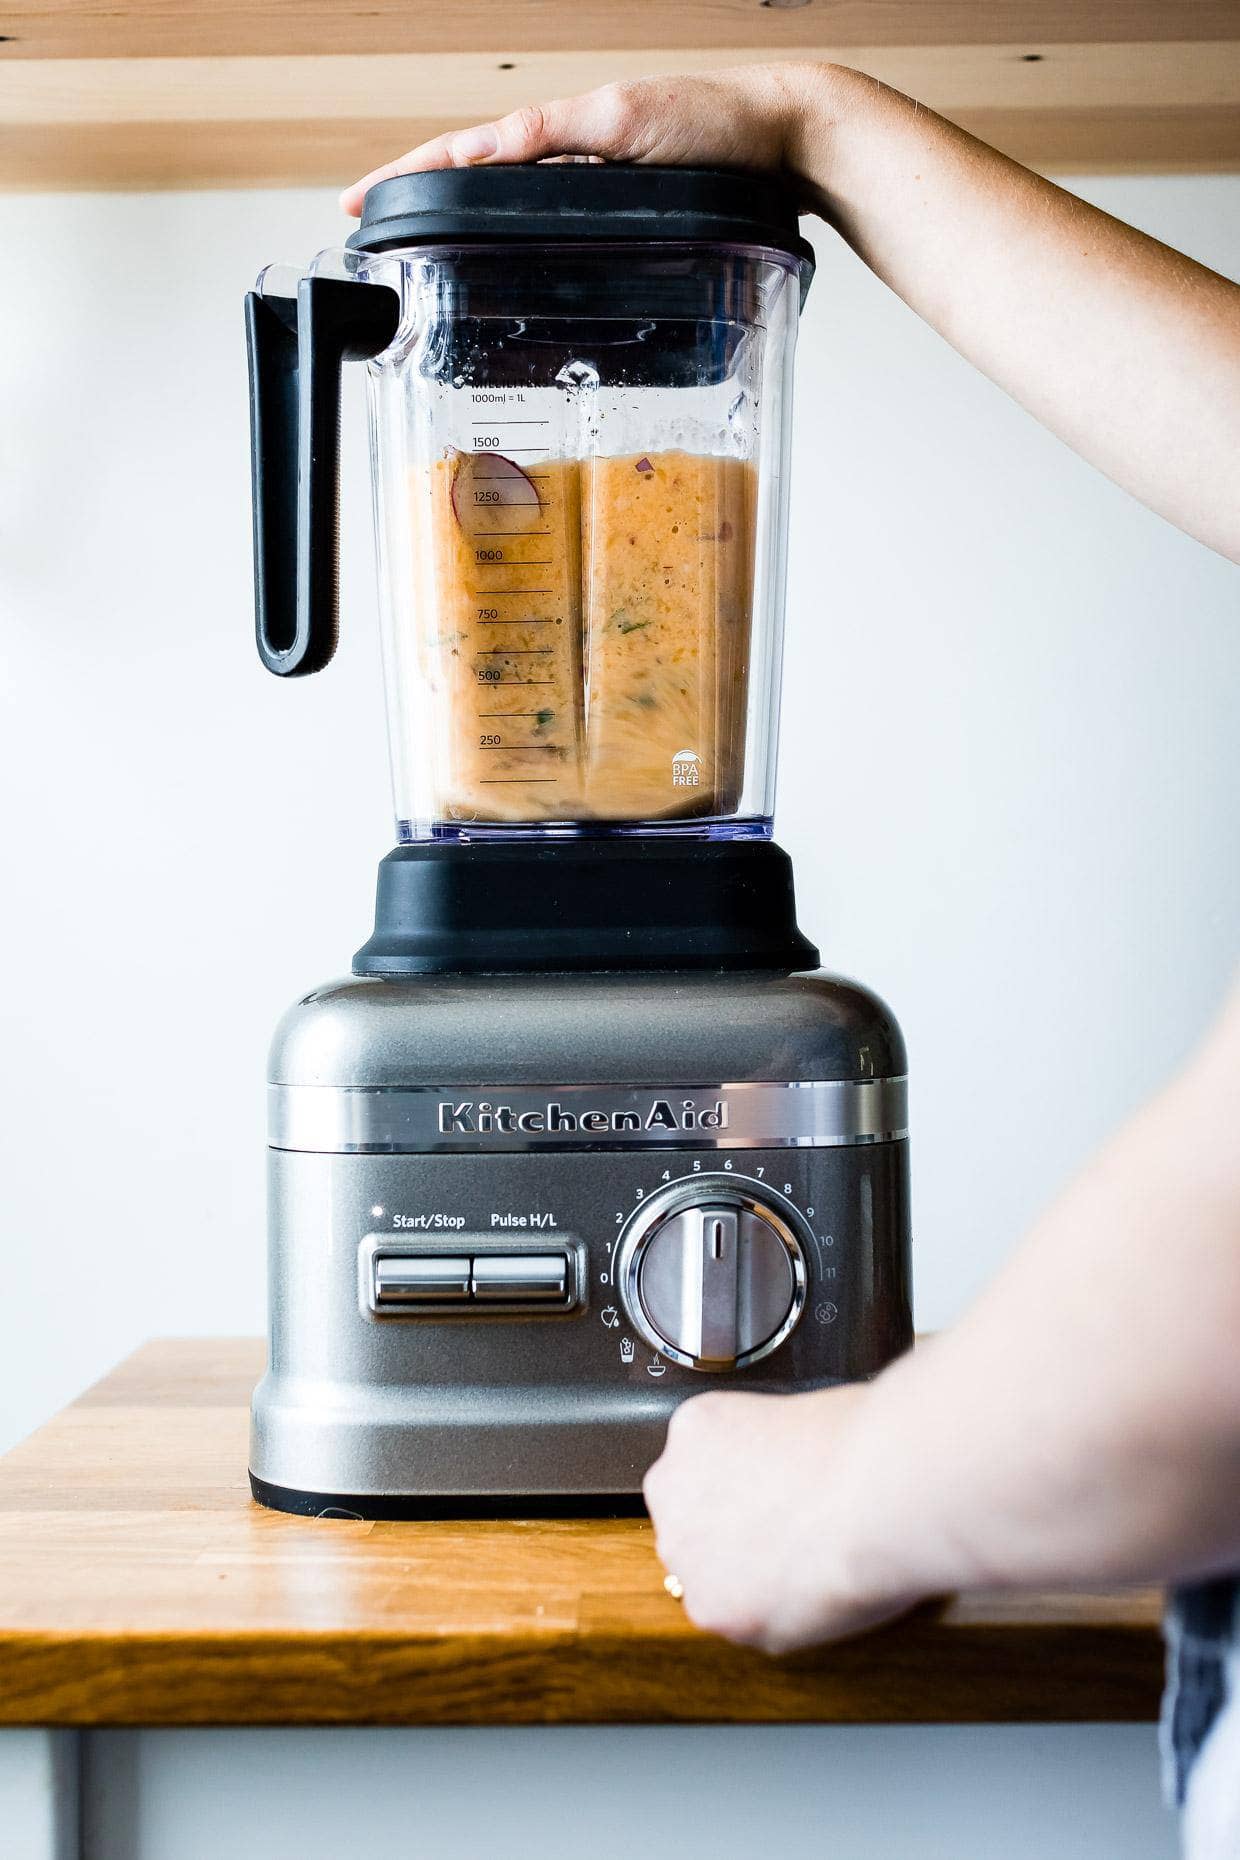 The Kitchen Pro Line blender comes with a 10-year warranty